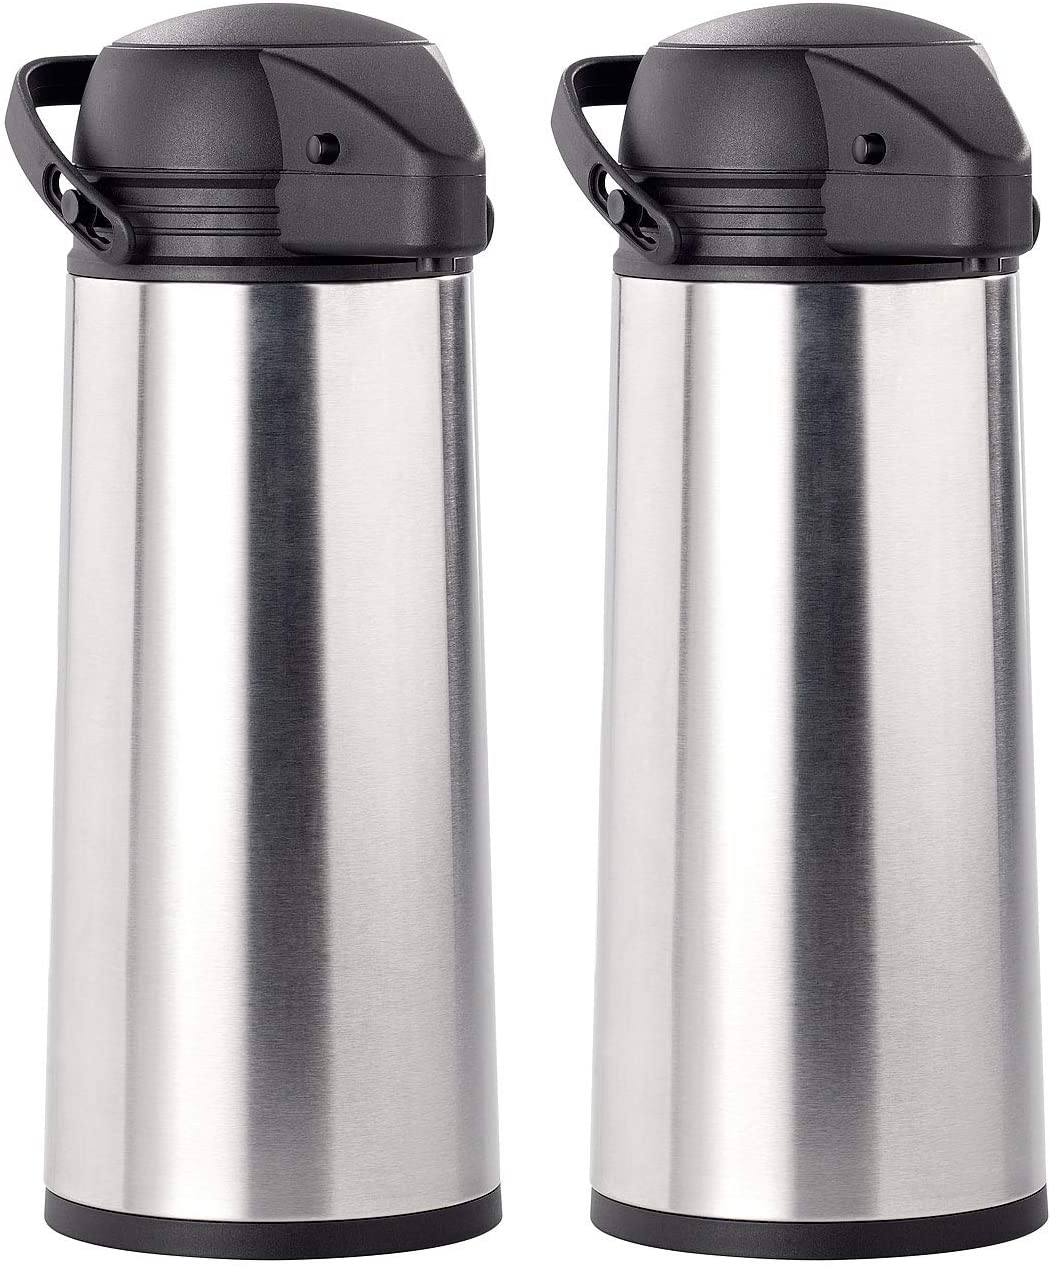 Rosenstein & Söhne Thermos Jug: 2 Pack Stainless Steel Pump Vacuum Insulated Jug, 1.9 Litre (Coffee Pots)